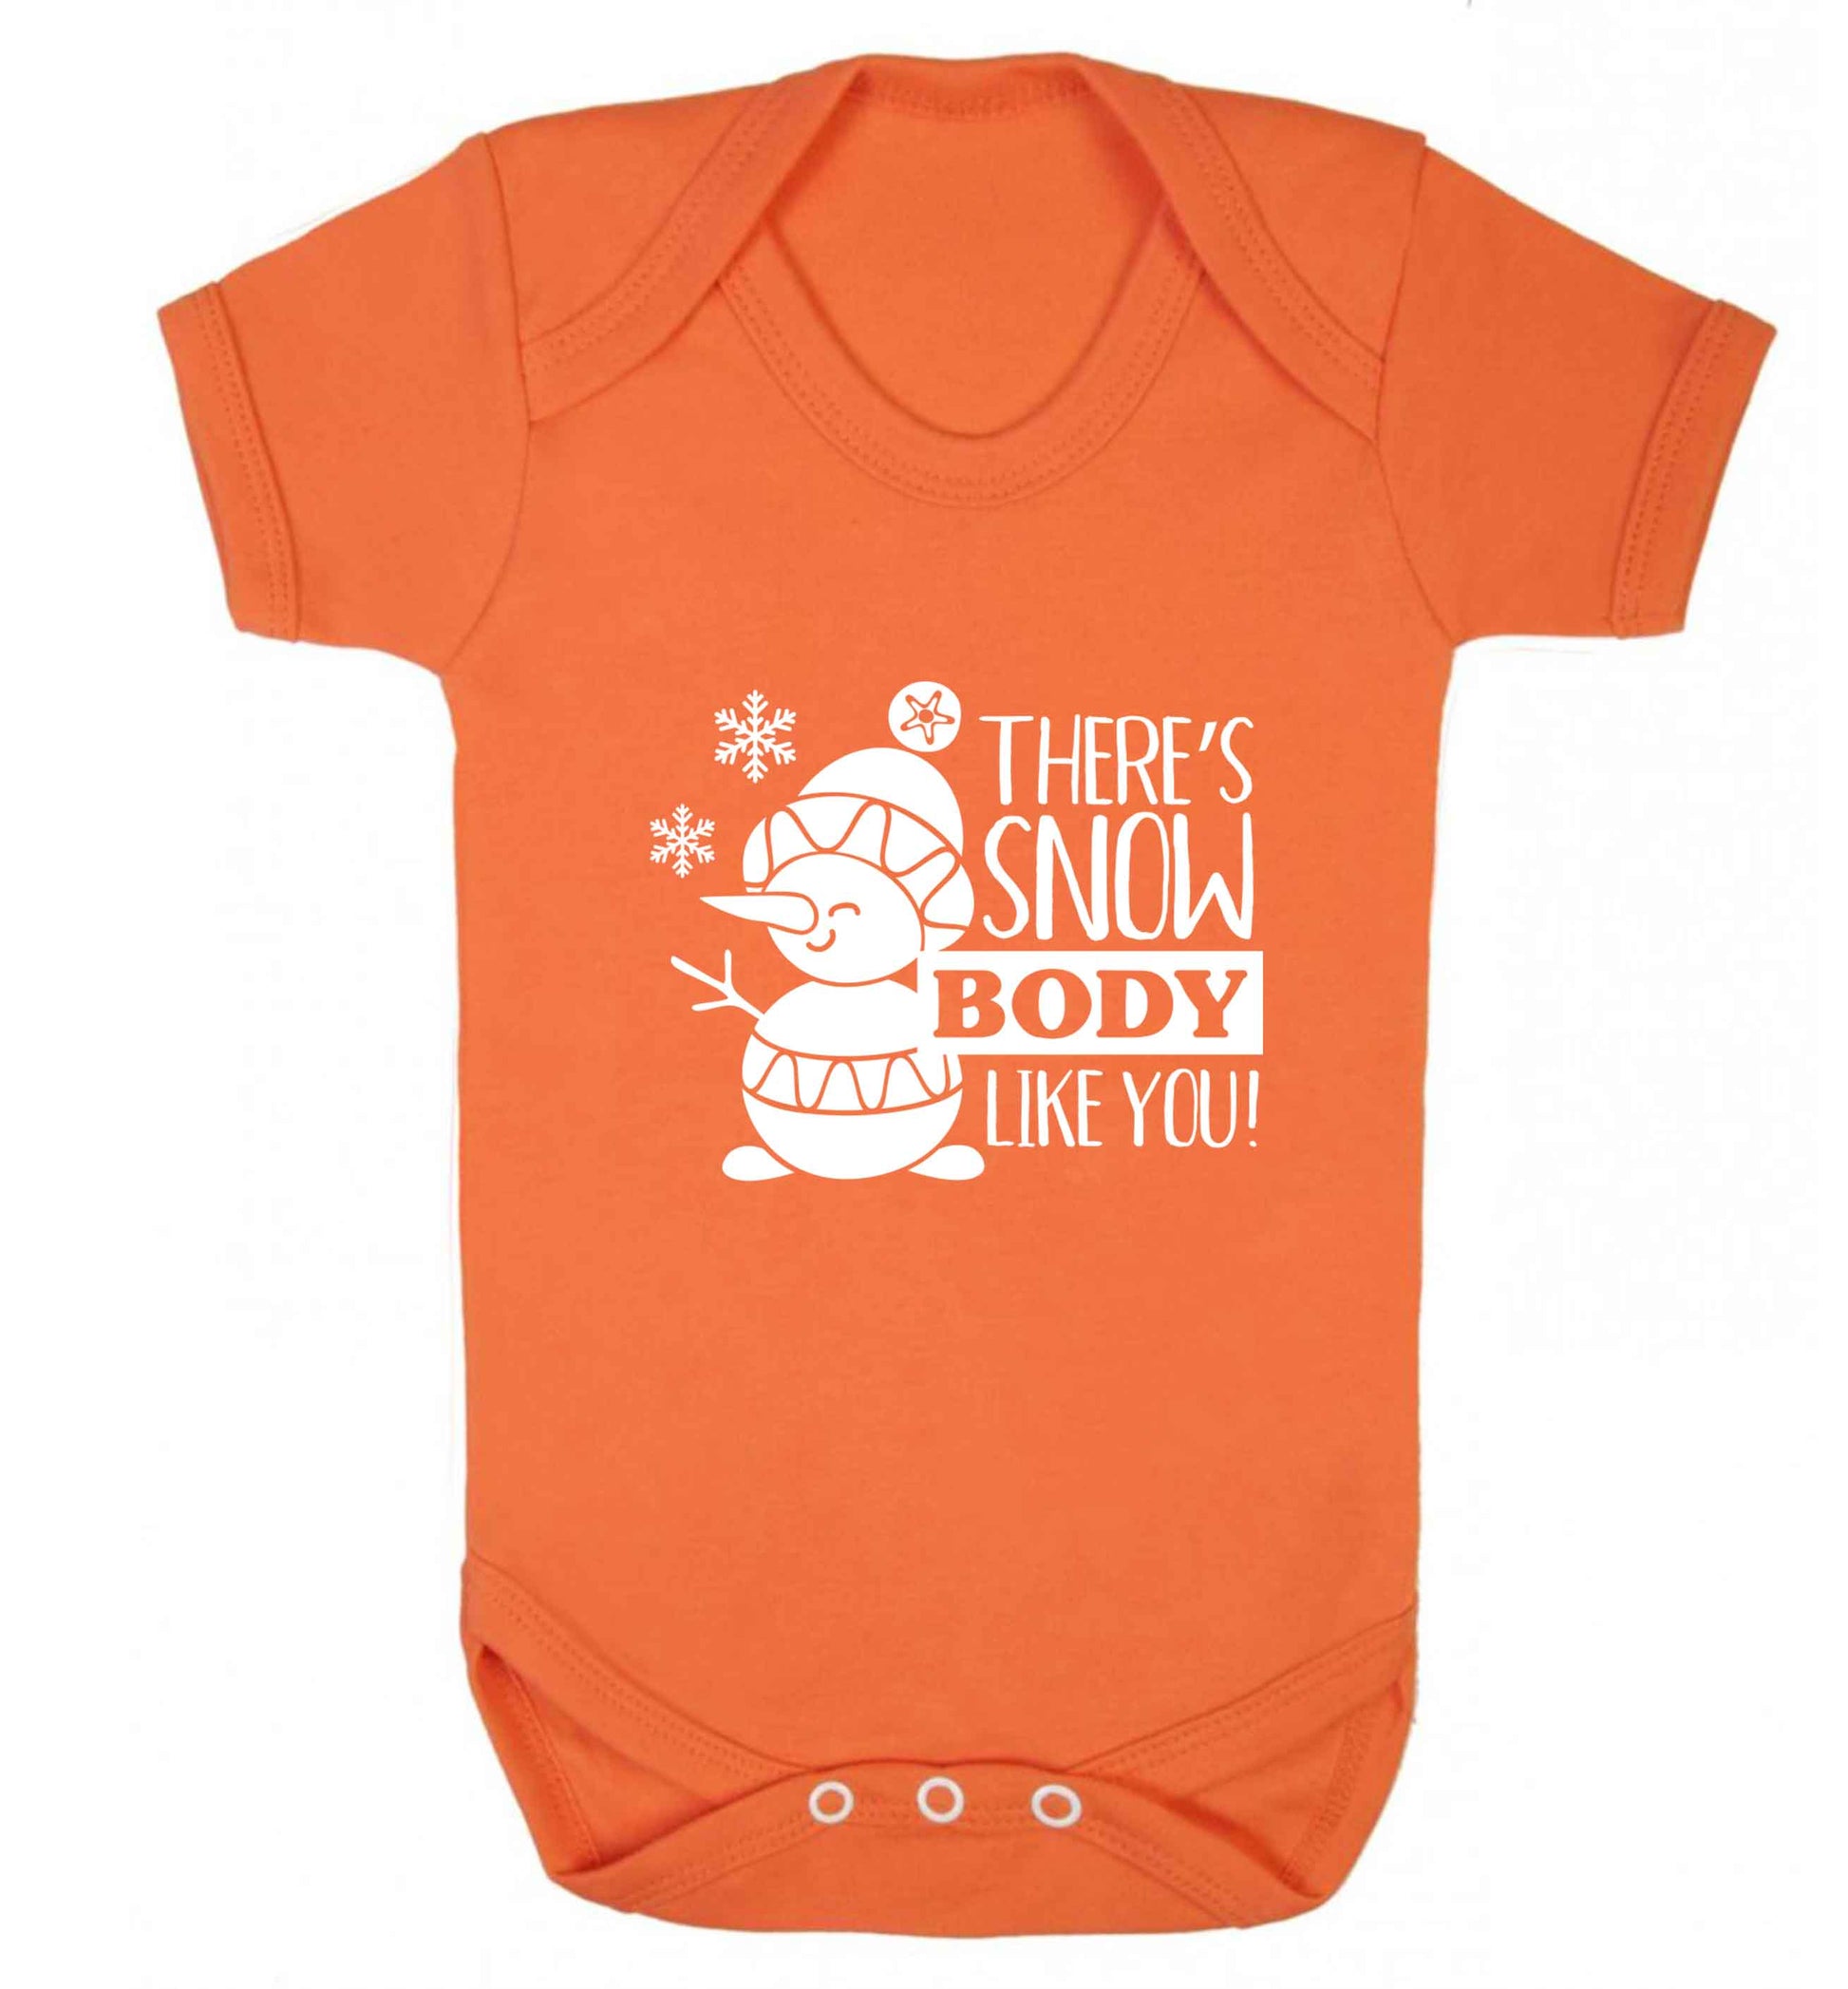 There's snow body like you baby vest orange 18-24 months